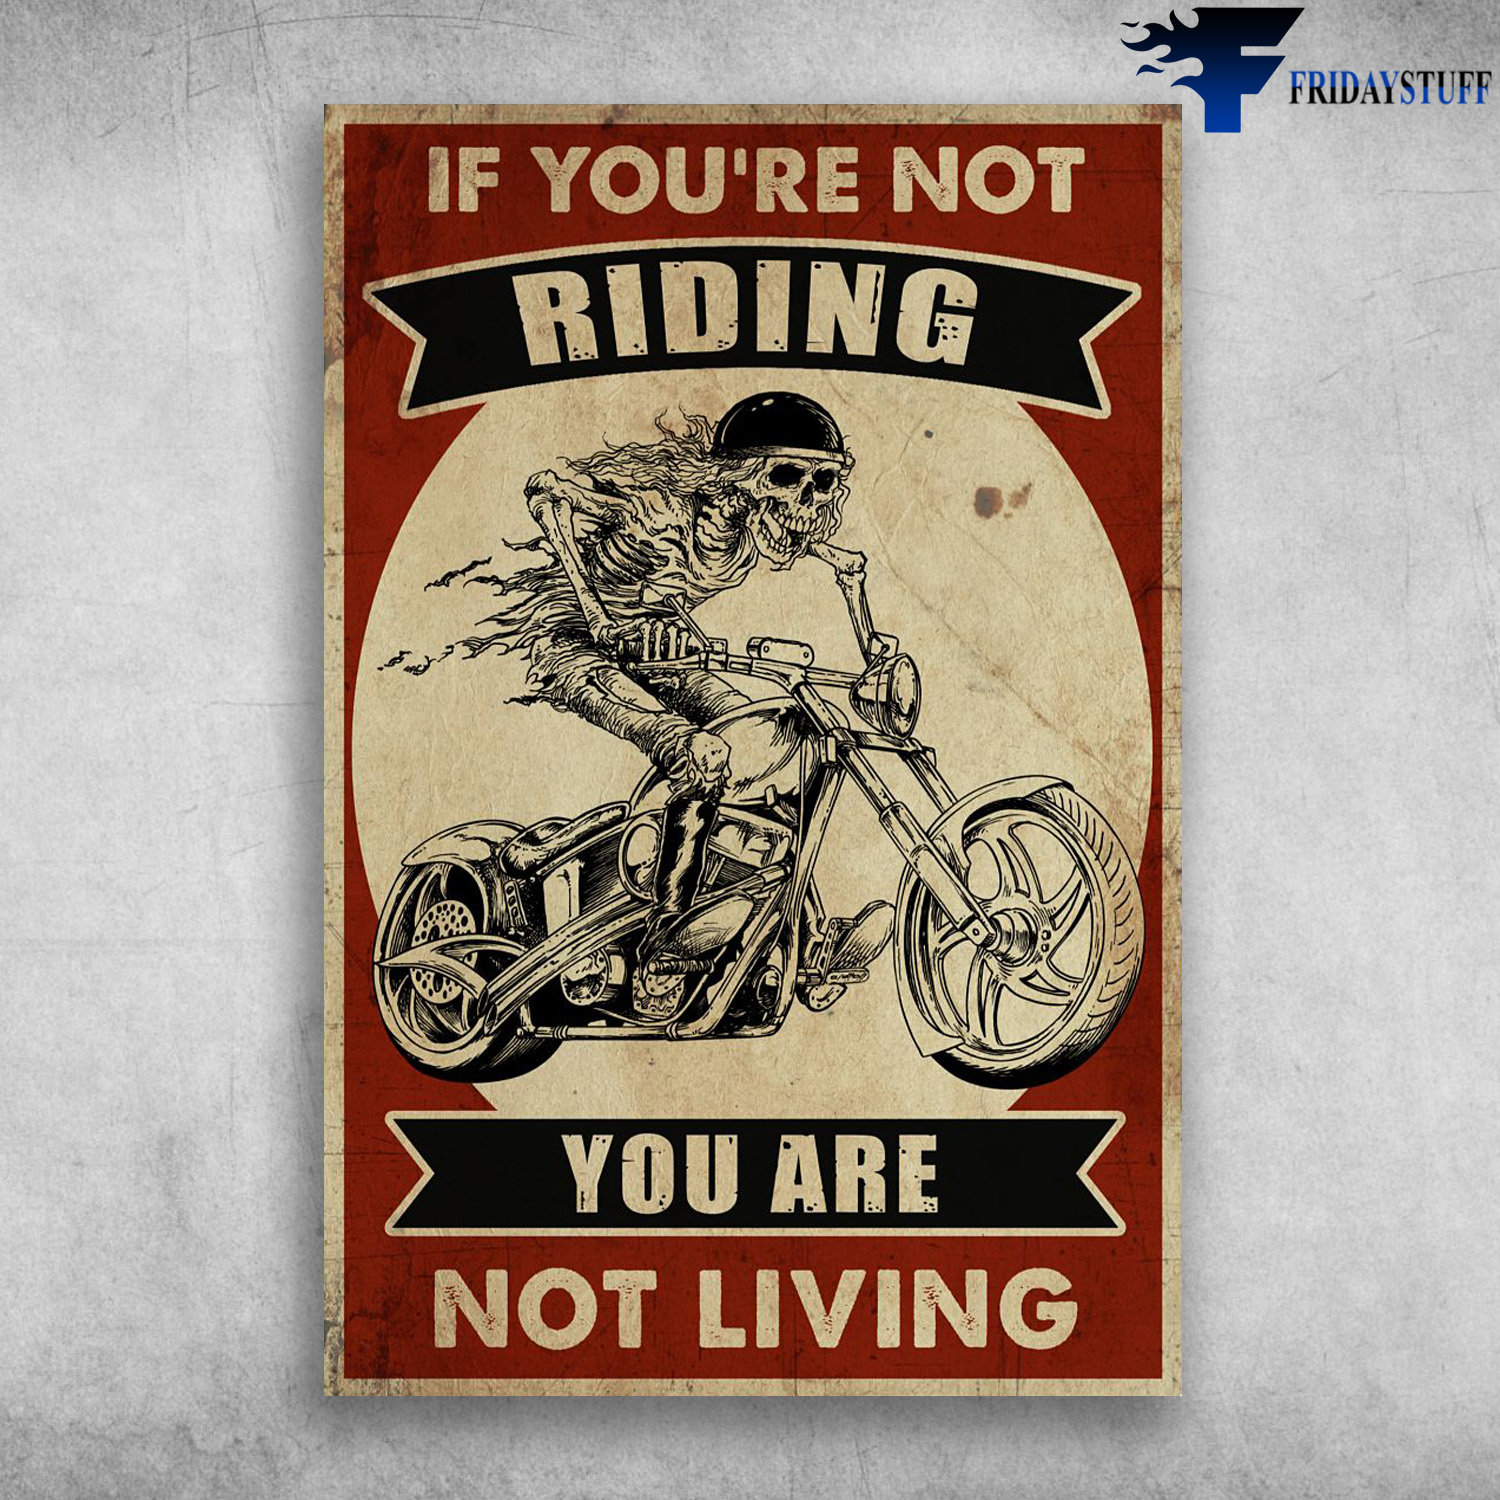 Skeleton Riding Motorbike - If You're Not Riding, You Are Not Living